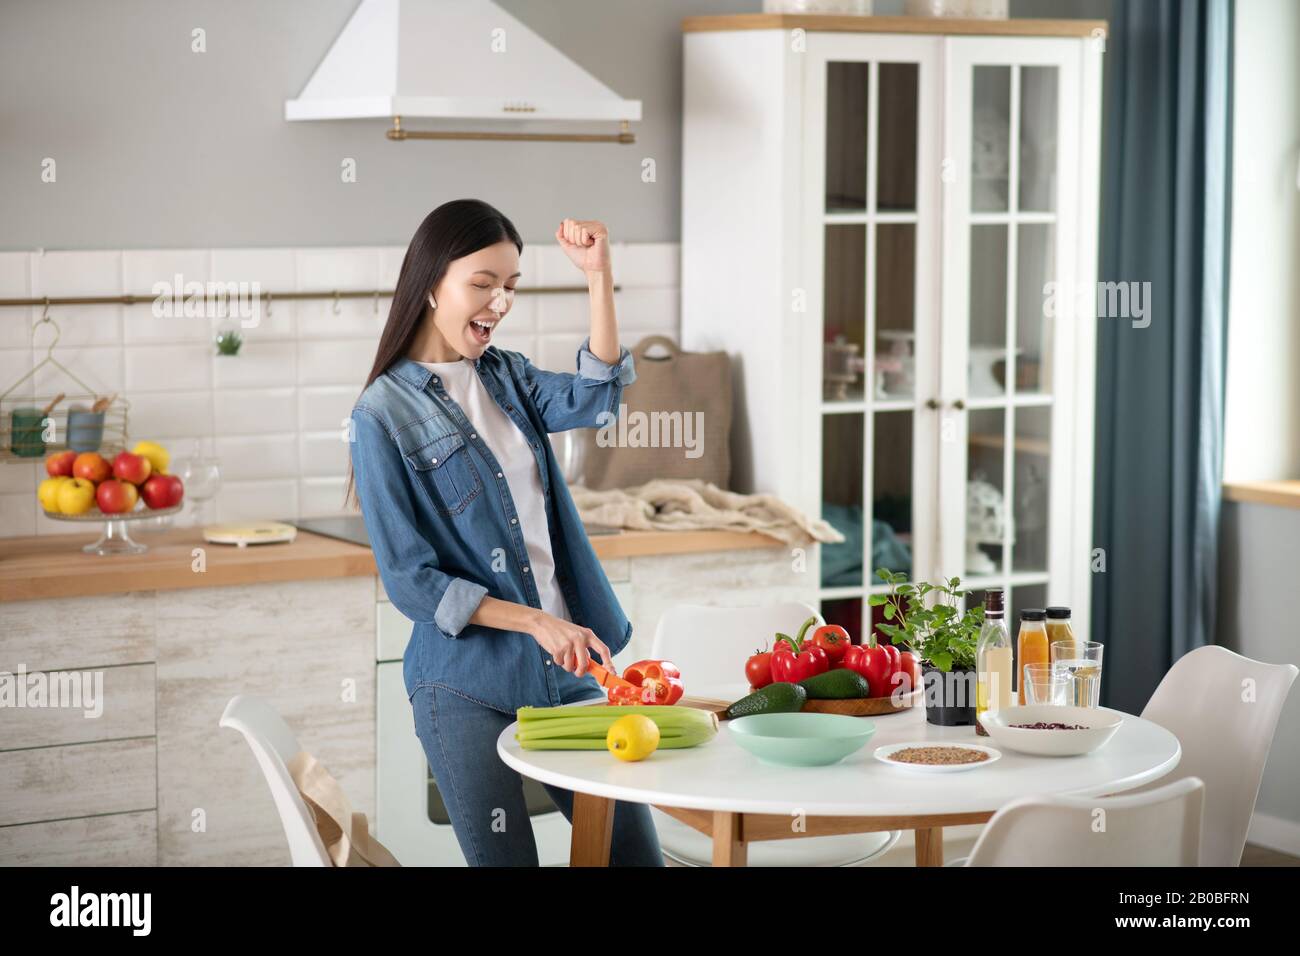 Cheerful young woman slicing red bell pepper. Stock Photo